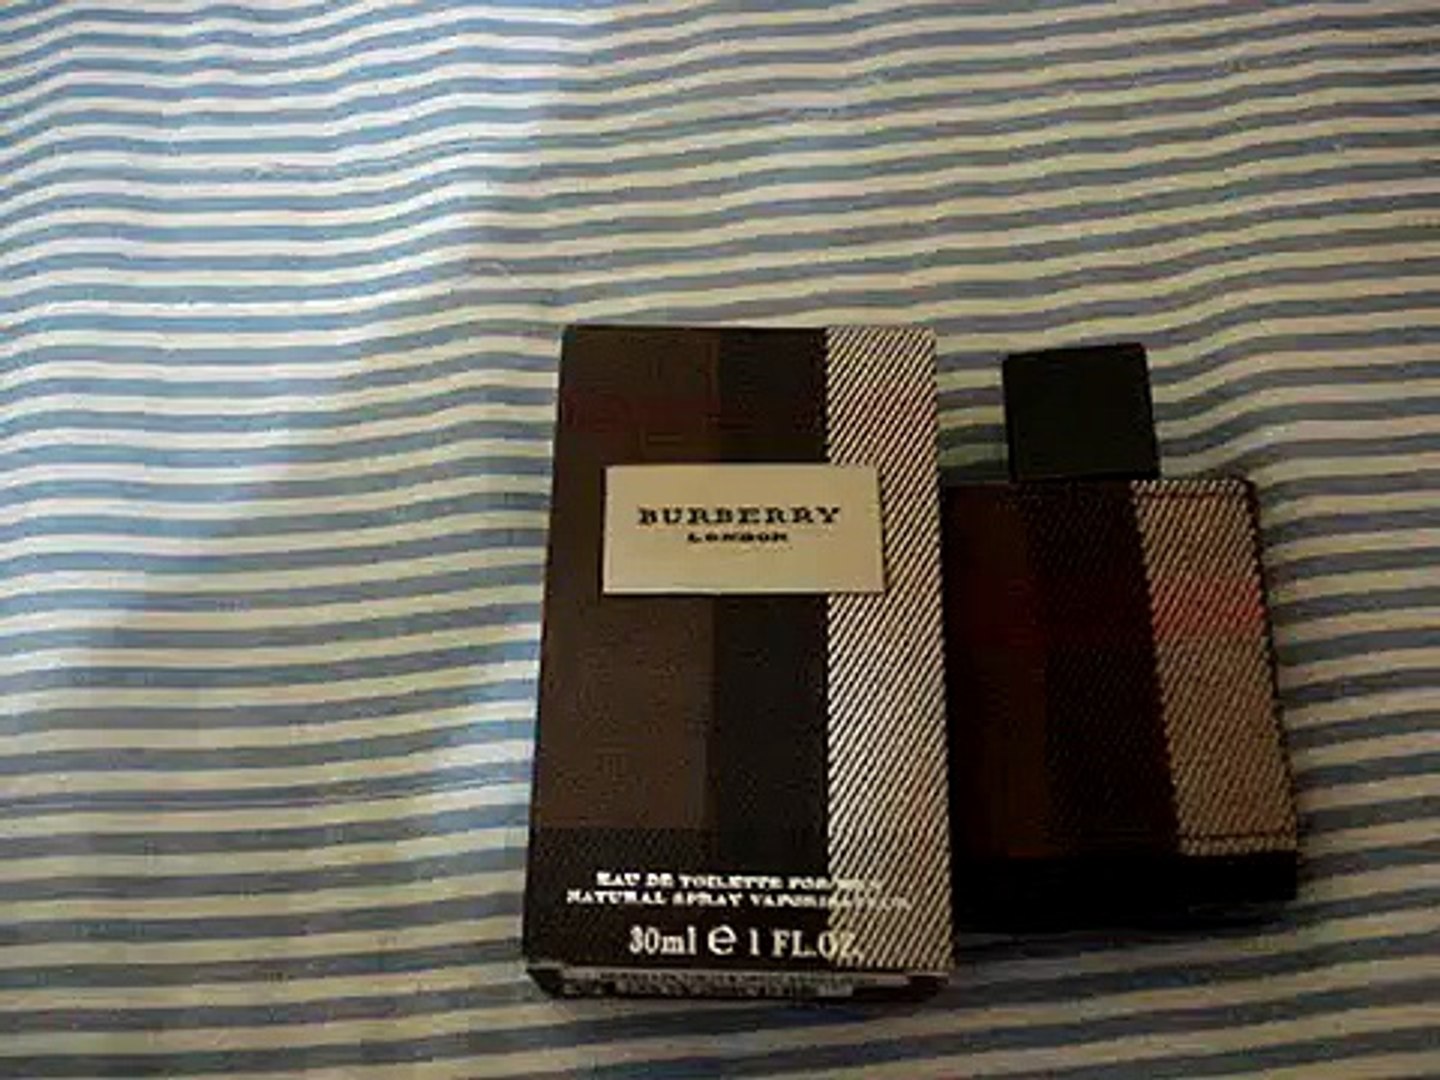 Fake or Real Burberry London